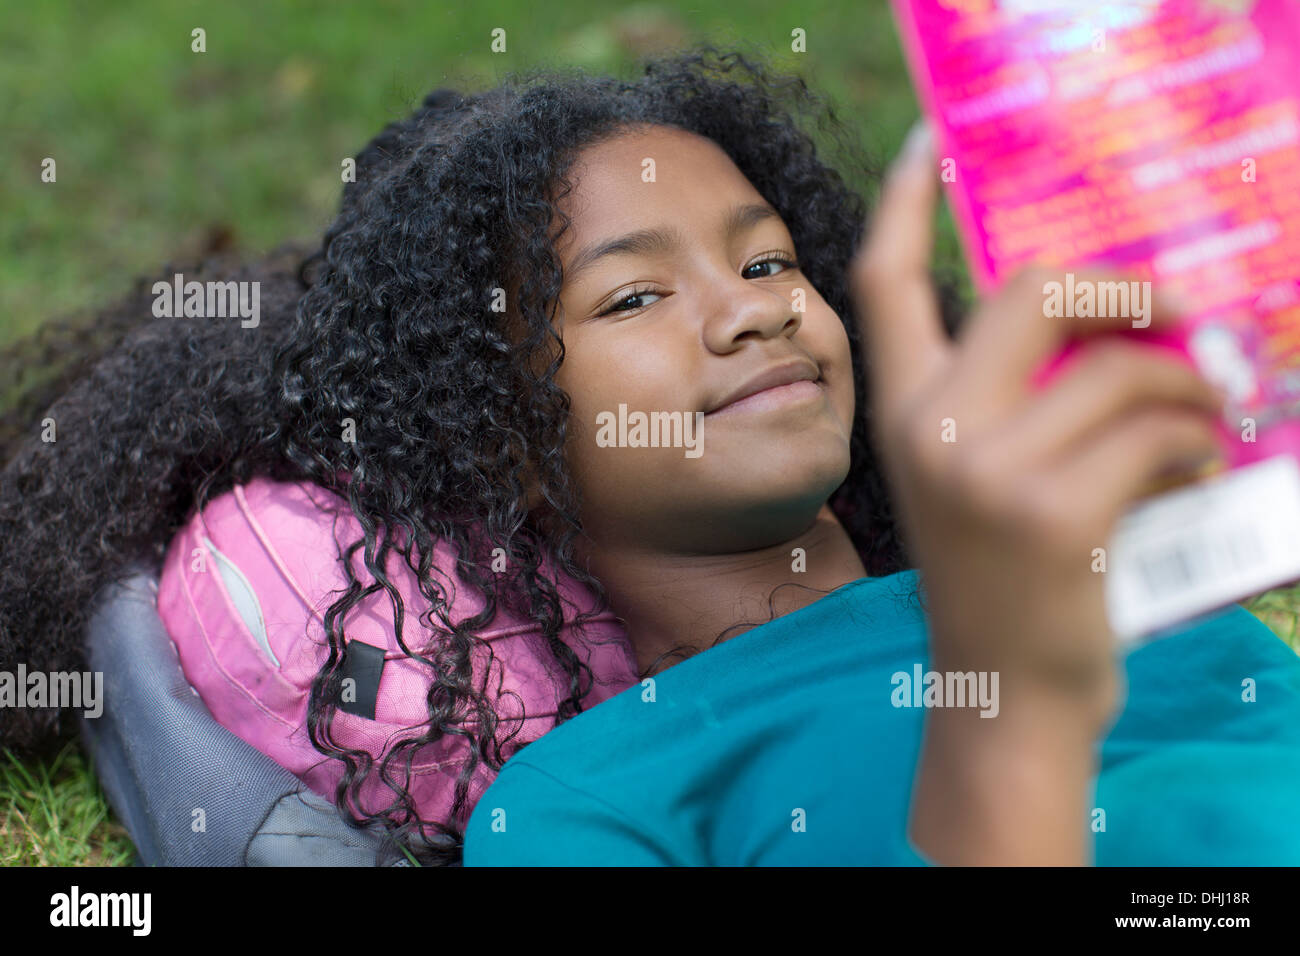 Close up portrait of young girl reading in park Stock Photo